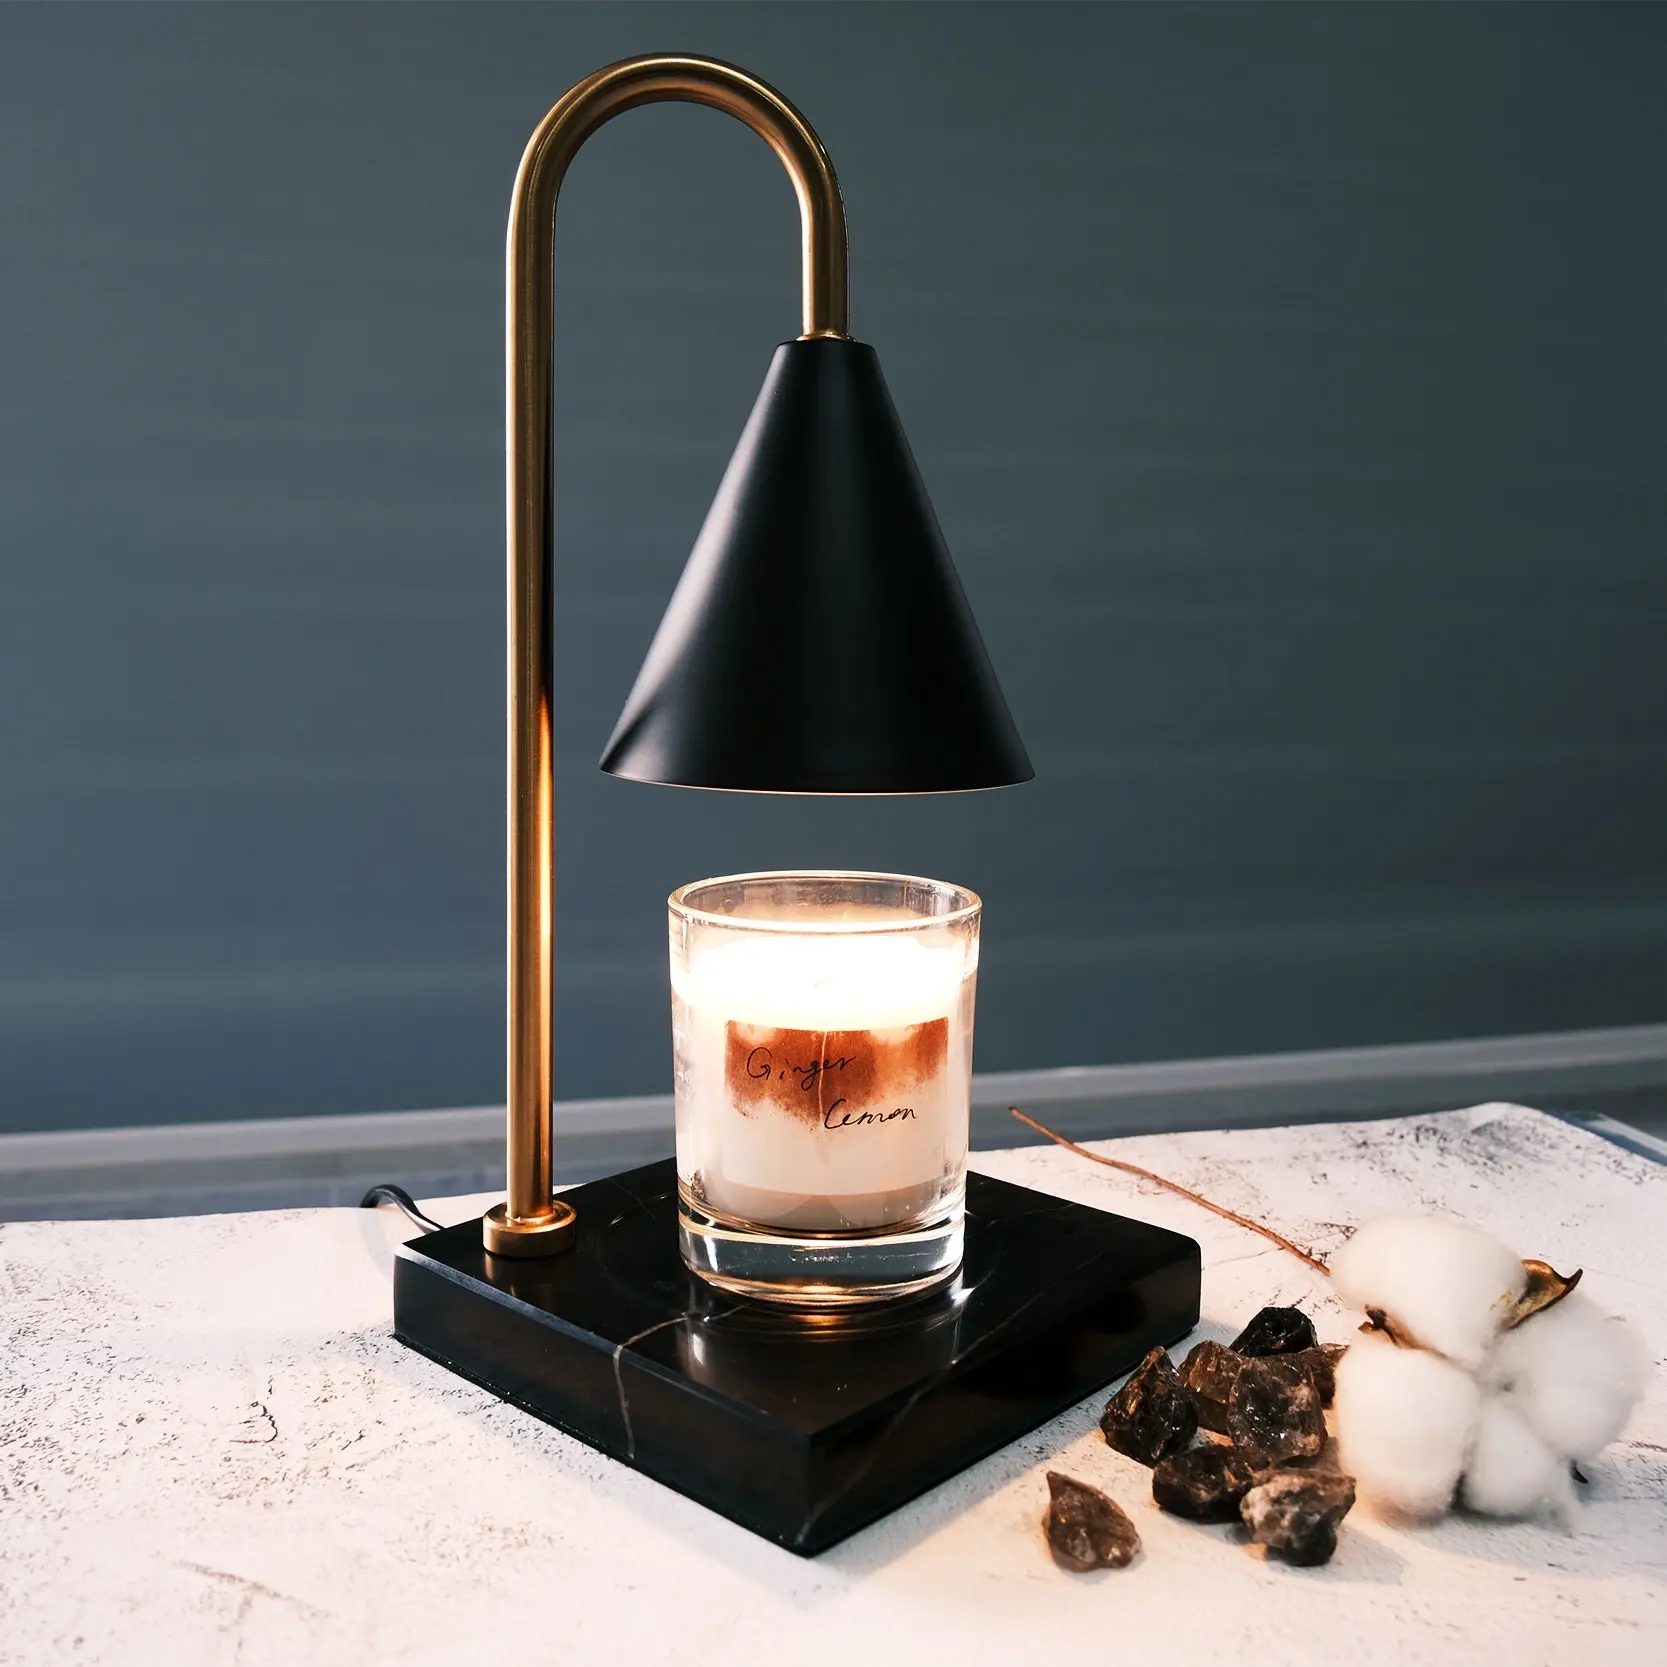 Splendid Quality Luxury Fashionable Metal Electric Scented Wax Candle Warmer Lamp